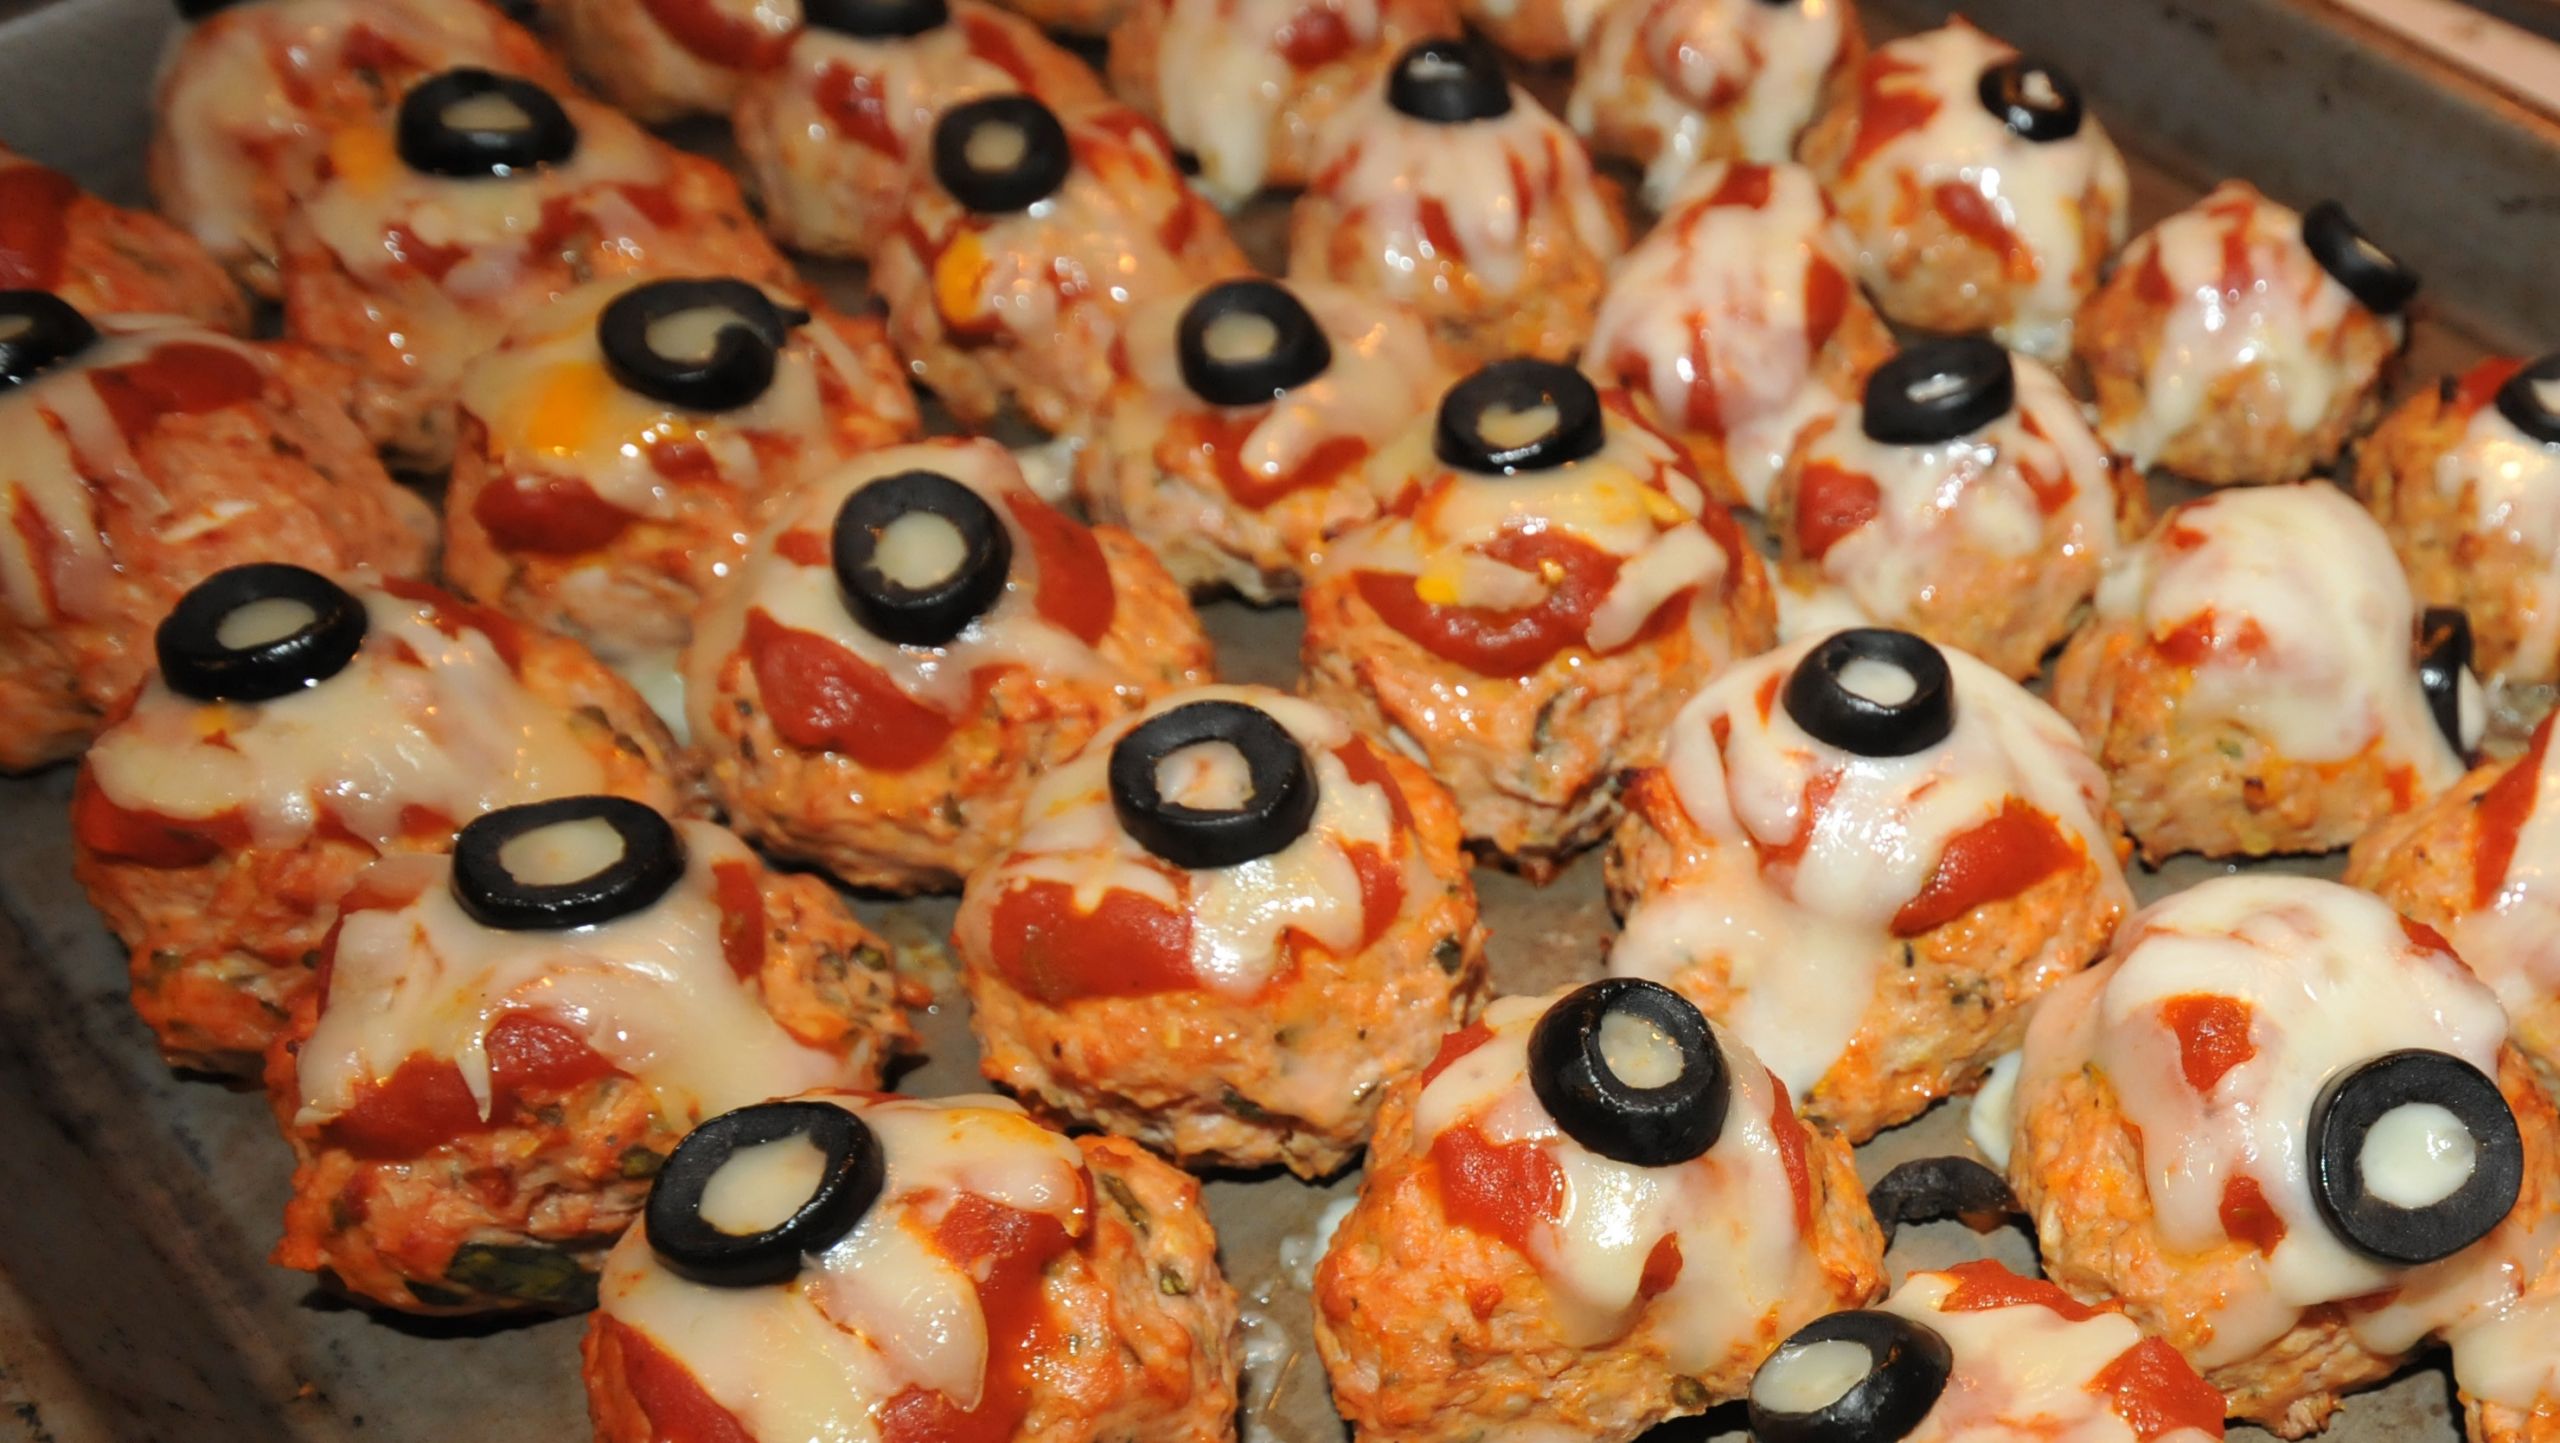 Spooky Party Food Ideas For Halloween
 halloween pictures halloween appetizers